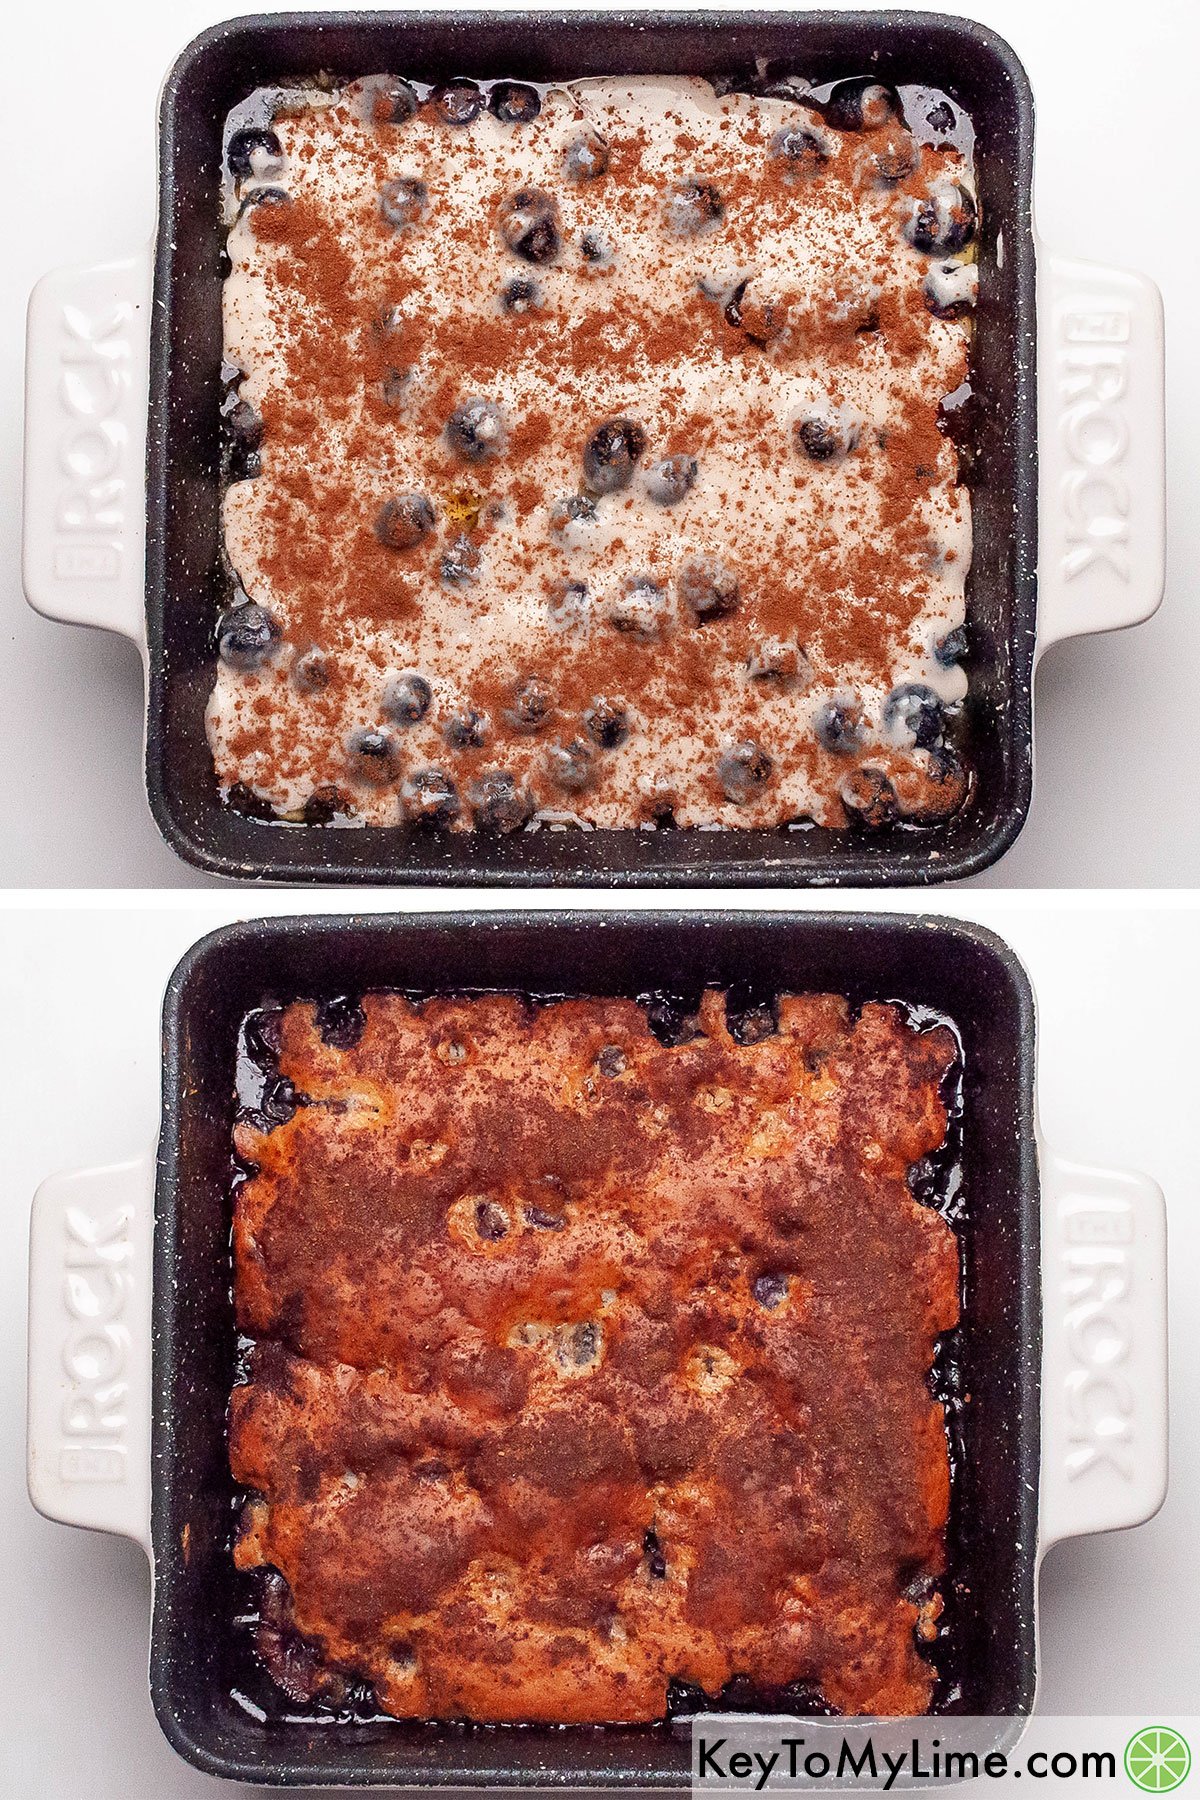 Bisquick blueberry cobbler before and after baking.